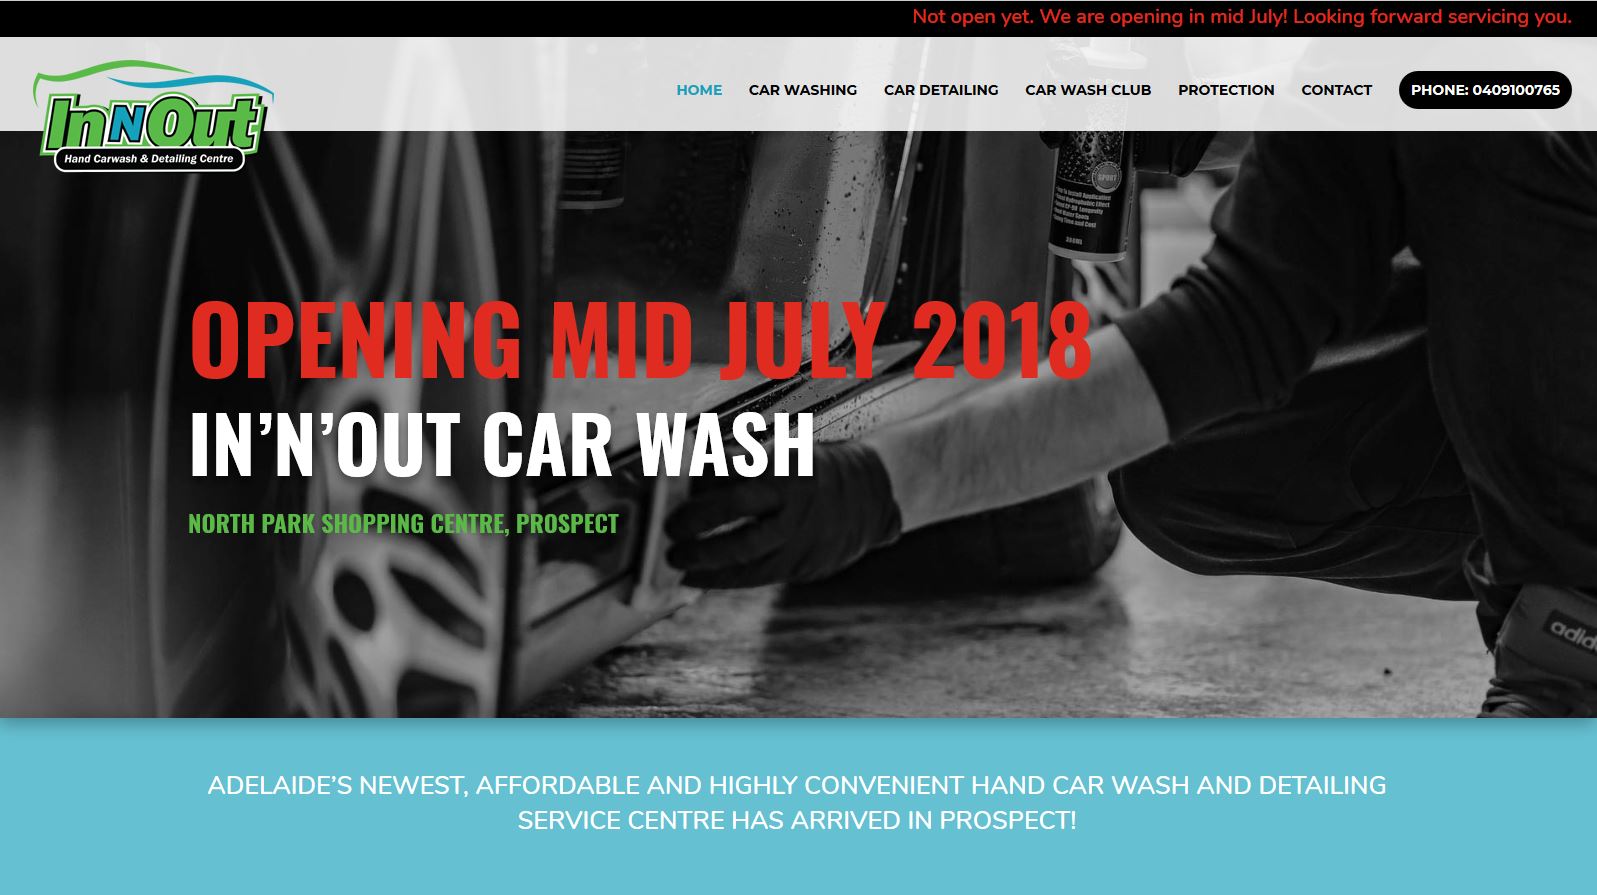 Website for car wash services In’n’out